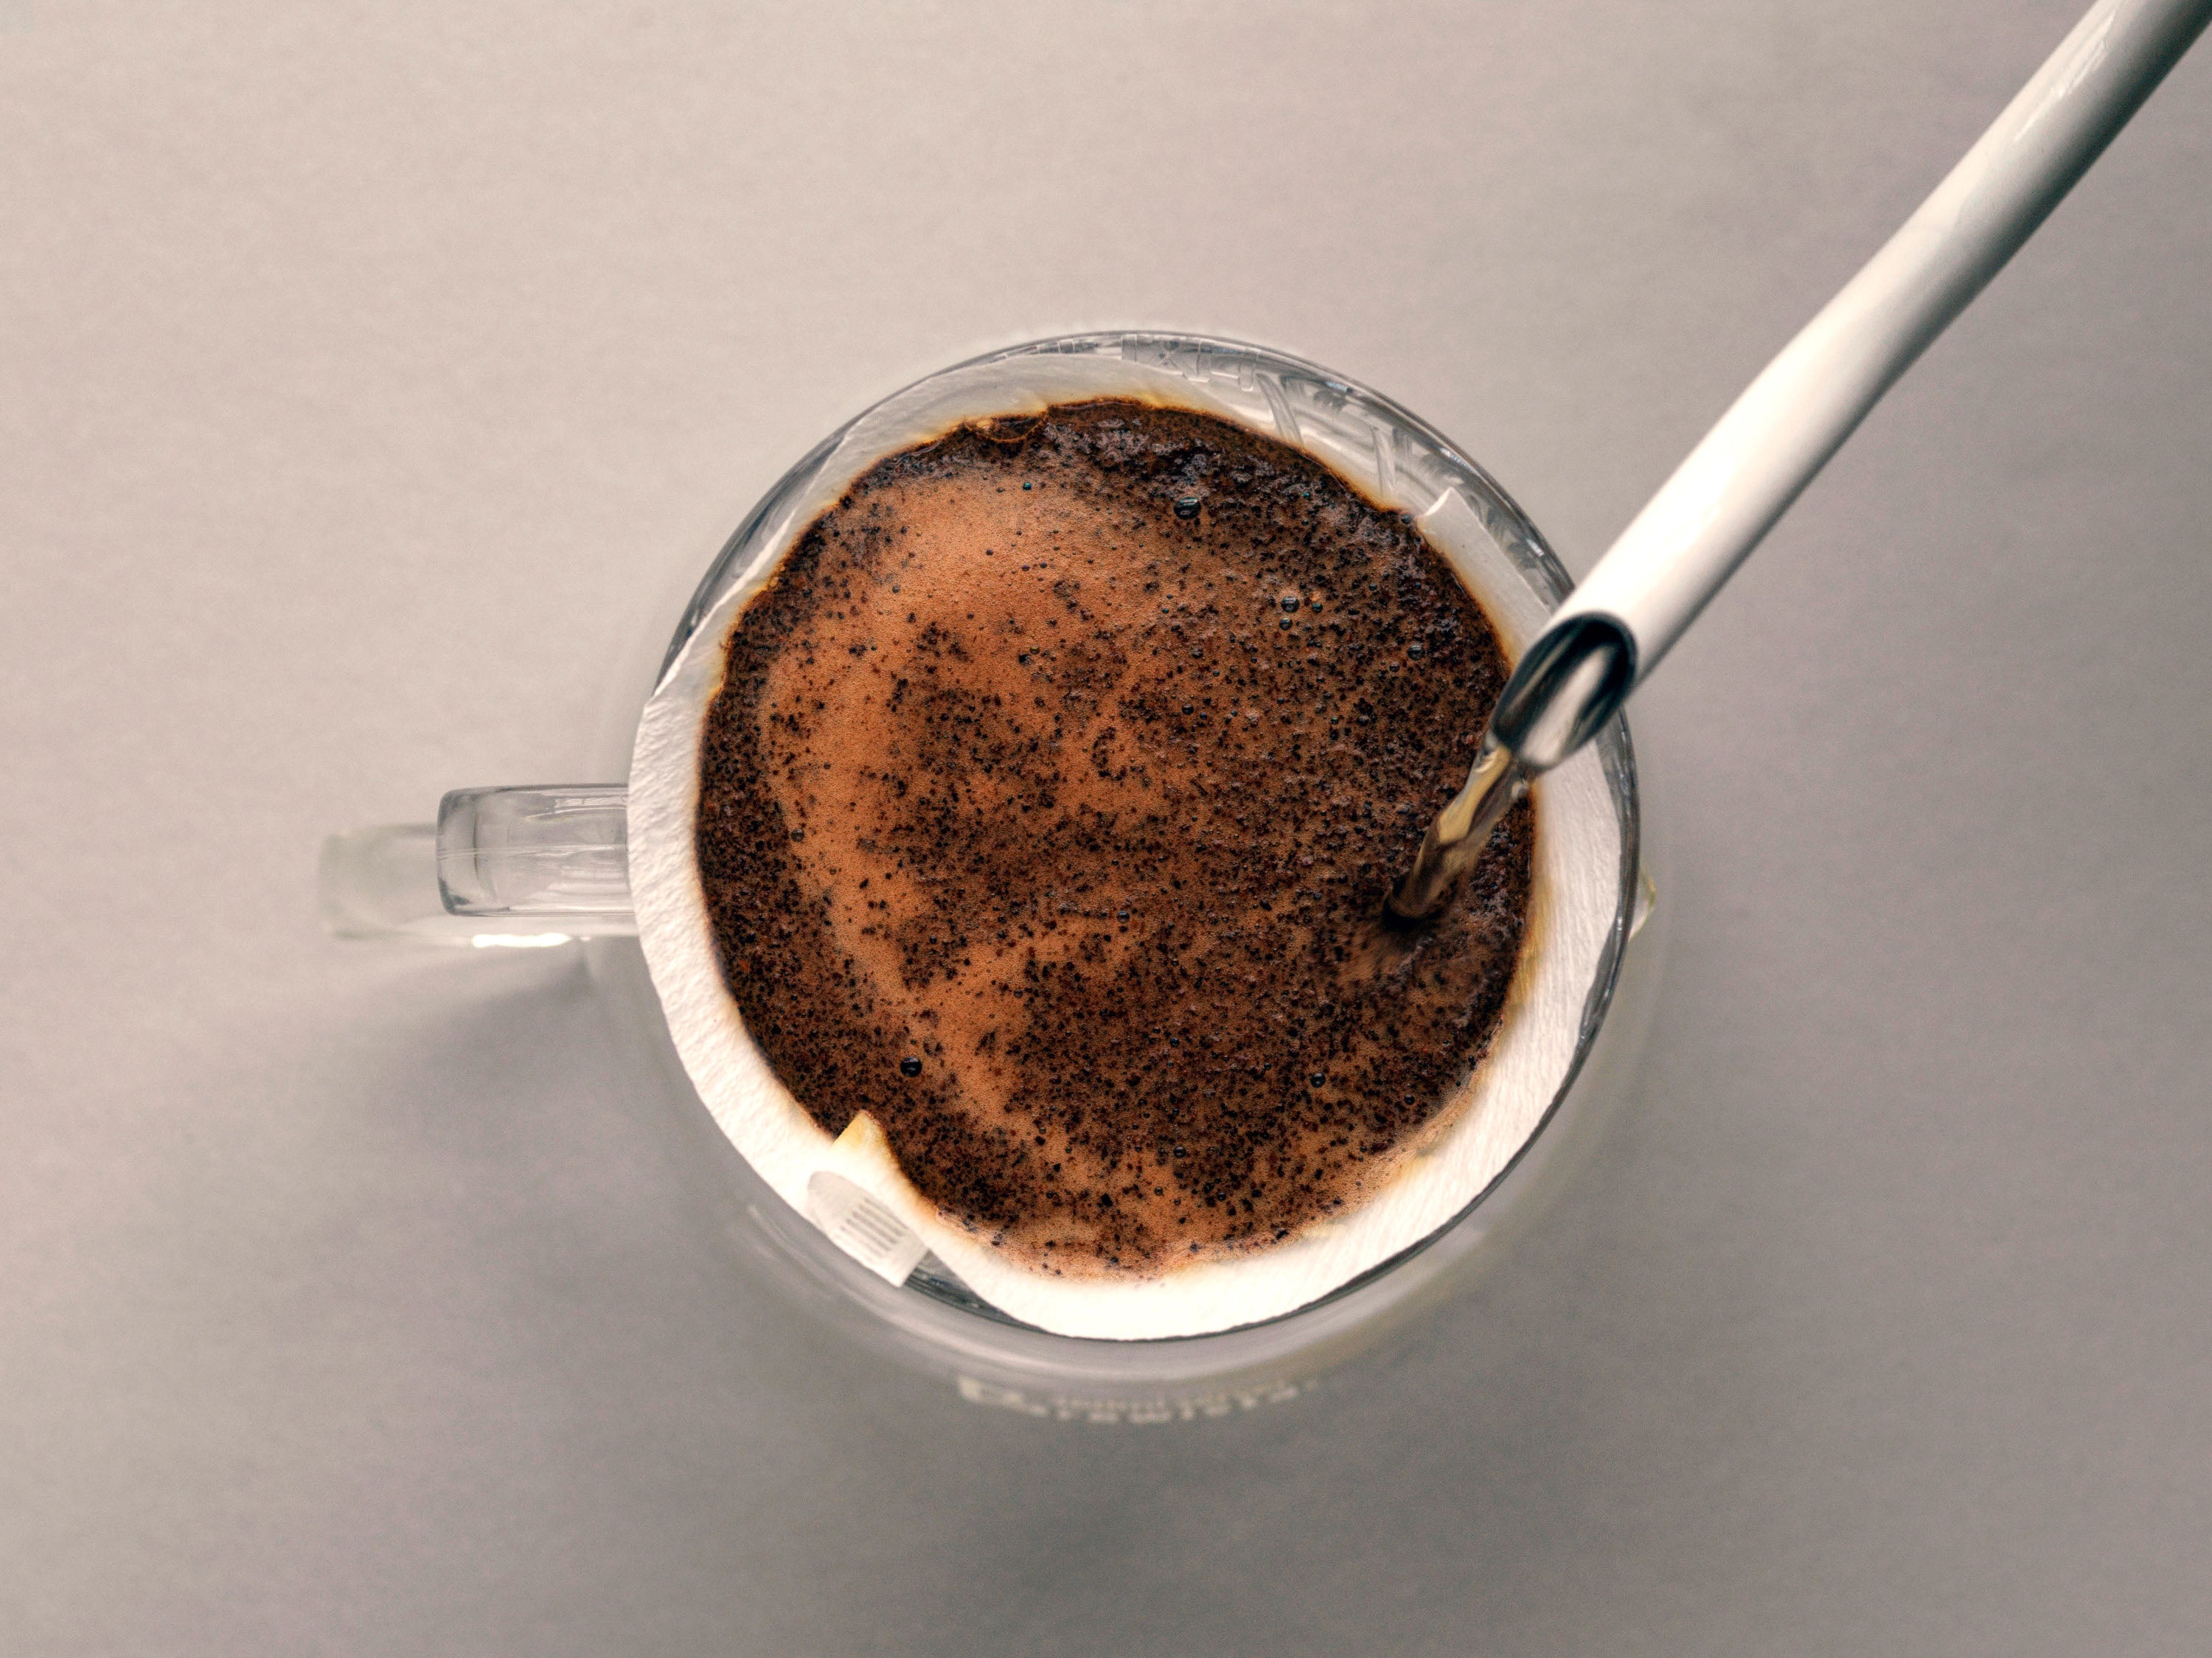 5 tools for making better coffee at home, according to caffeine aficionados